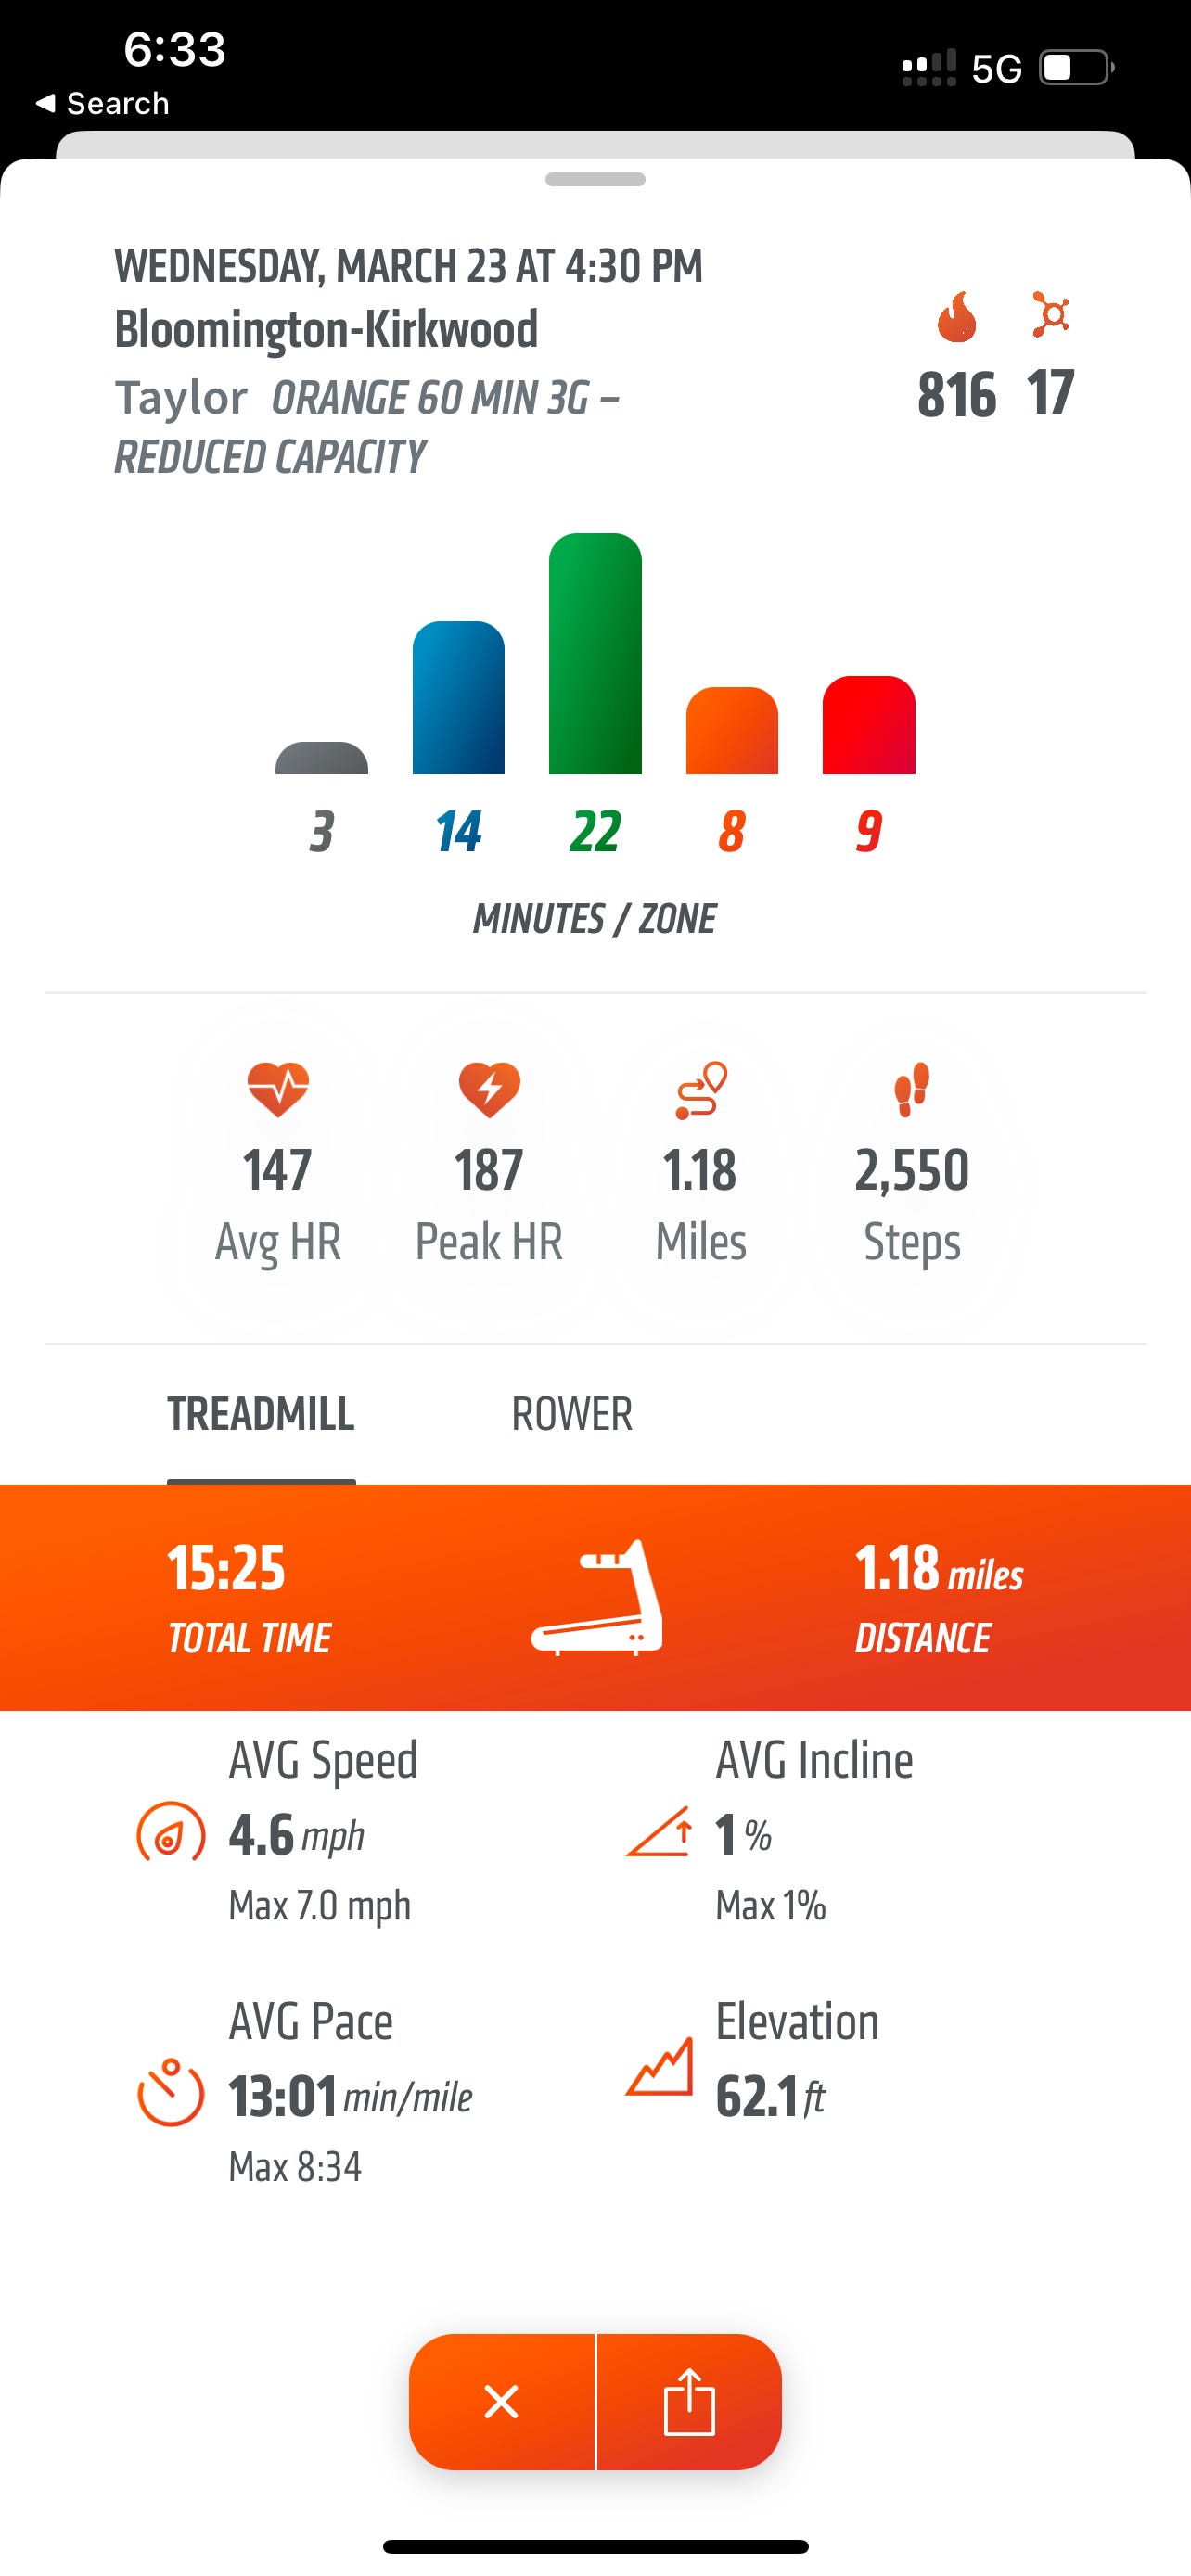 Splat! Orangetheory Fitness for Beginners: Journey of a Reluctant